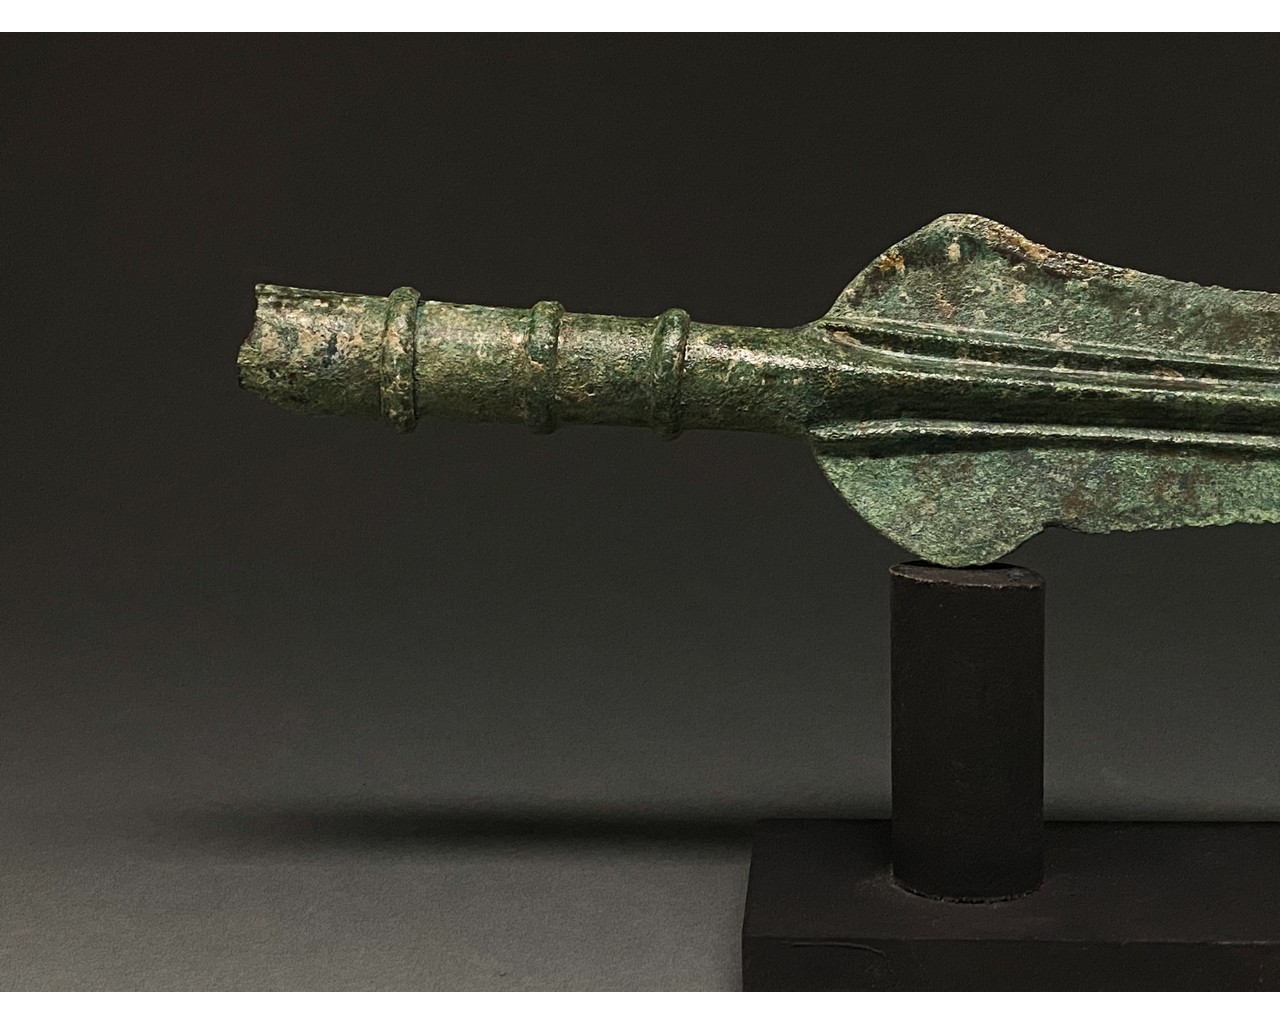 MAGNIFICENT ANCIENT BRONZE DECORATED SPEAR ON STAND - Image 2 of 7